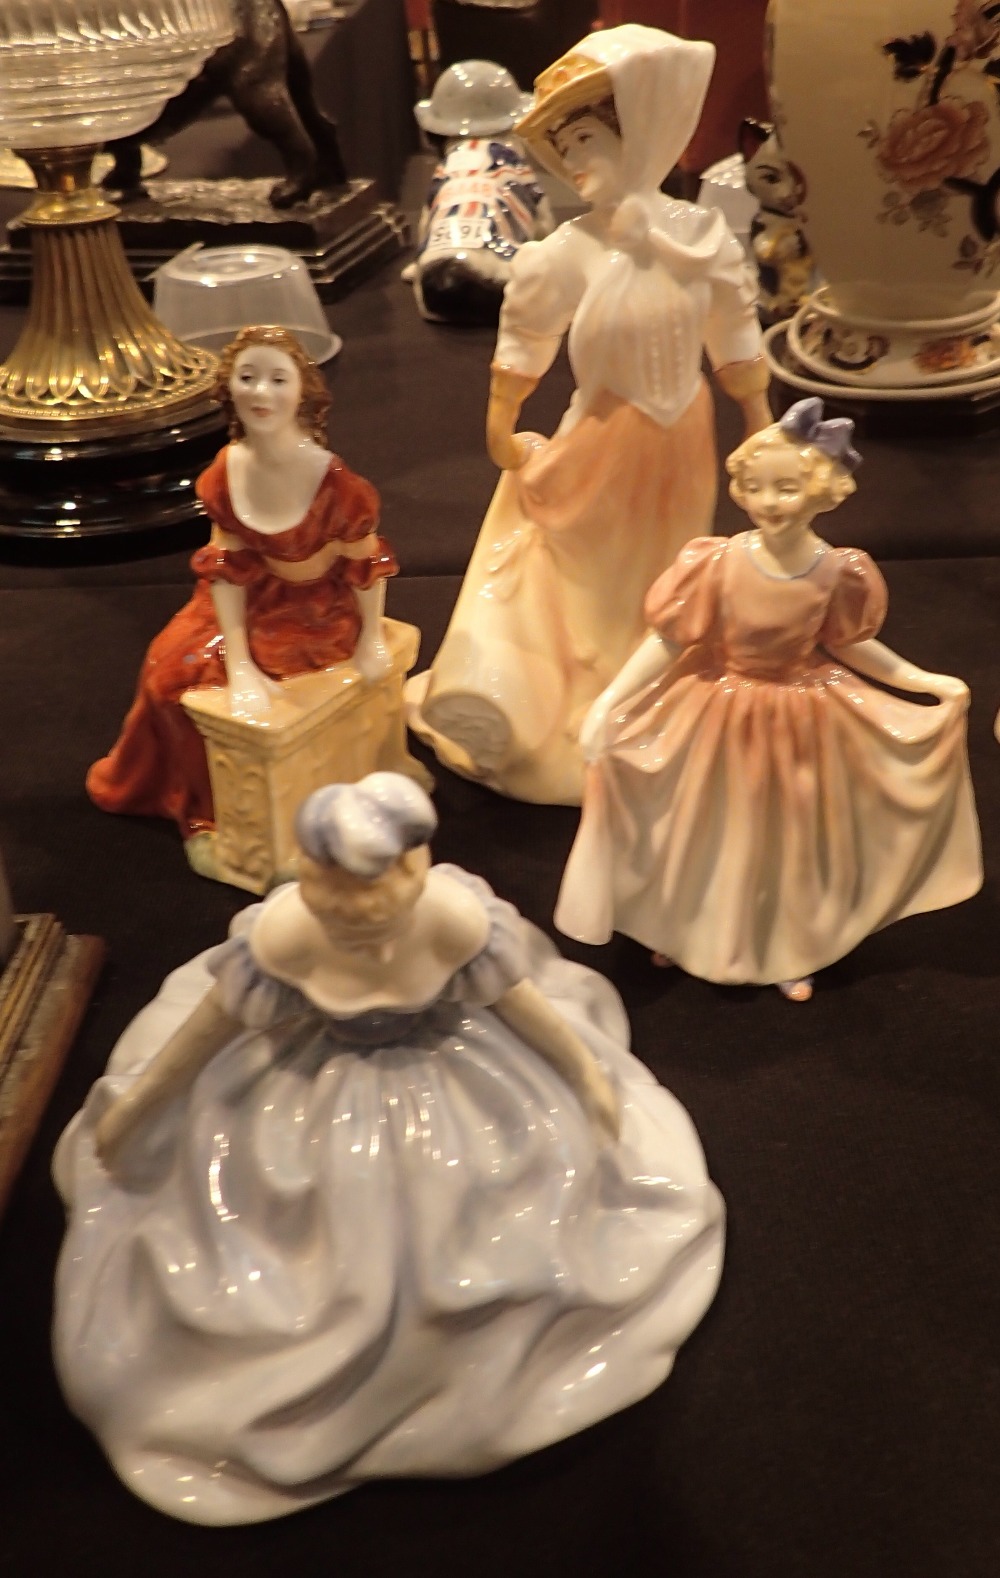 Four Royal Doulton figurines Debutante HN2210 Sweetling HN1935 The Open Road HN4161 and Judith